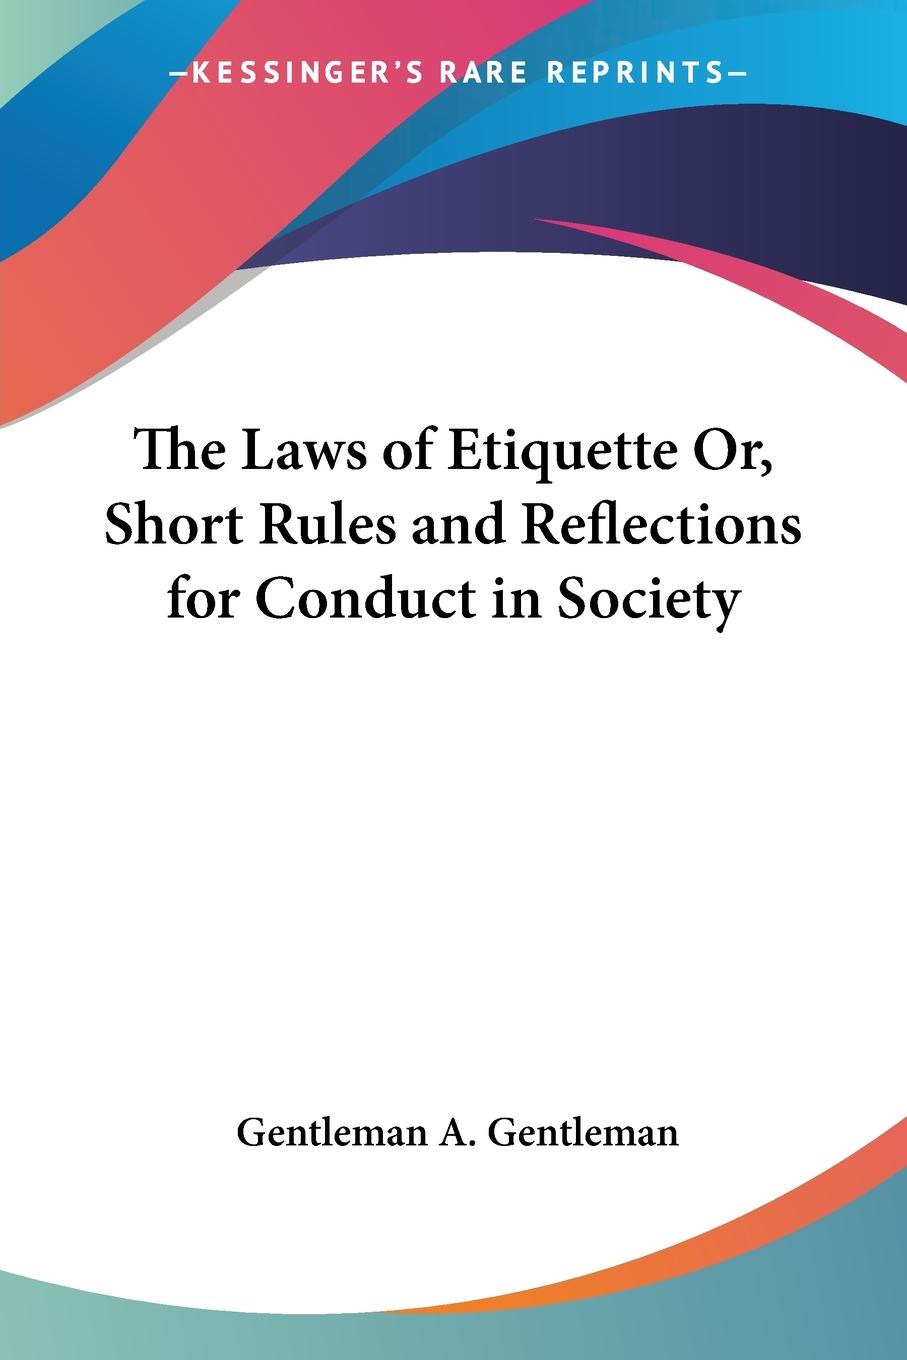 The Laws of Etiquette Or, Short Rules and Reflections for Conduct in Society - A. Gentleman, Gentleman